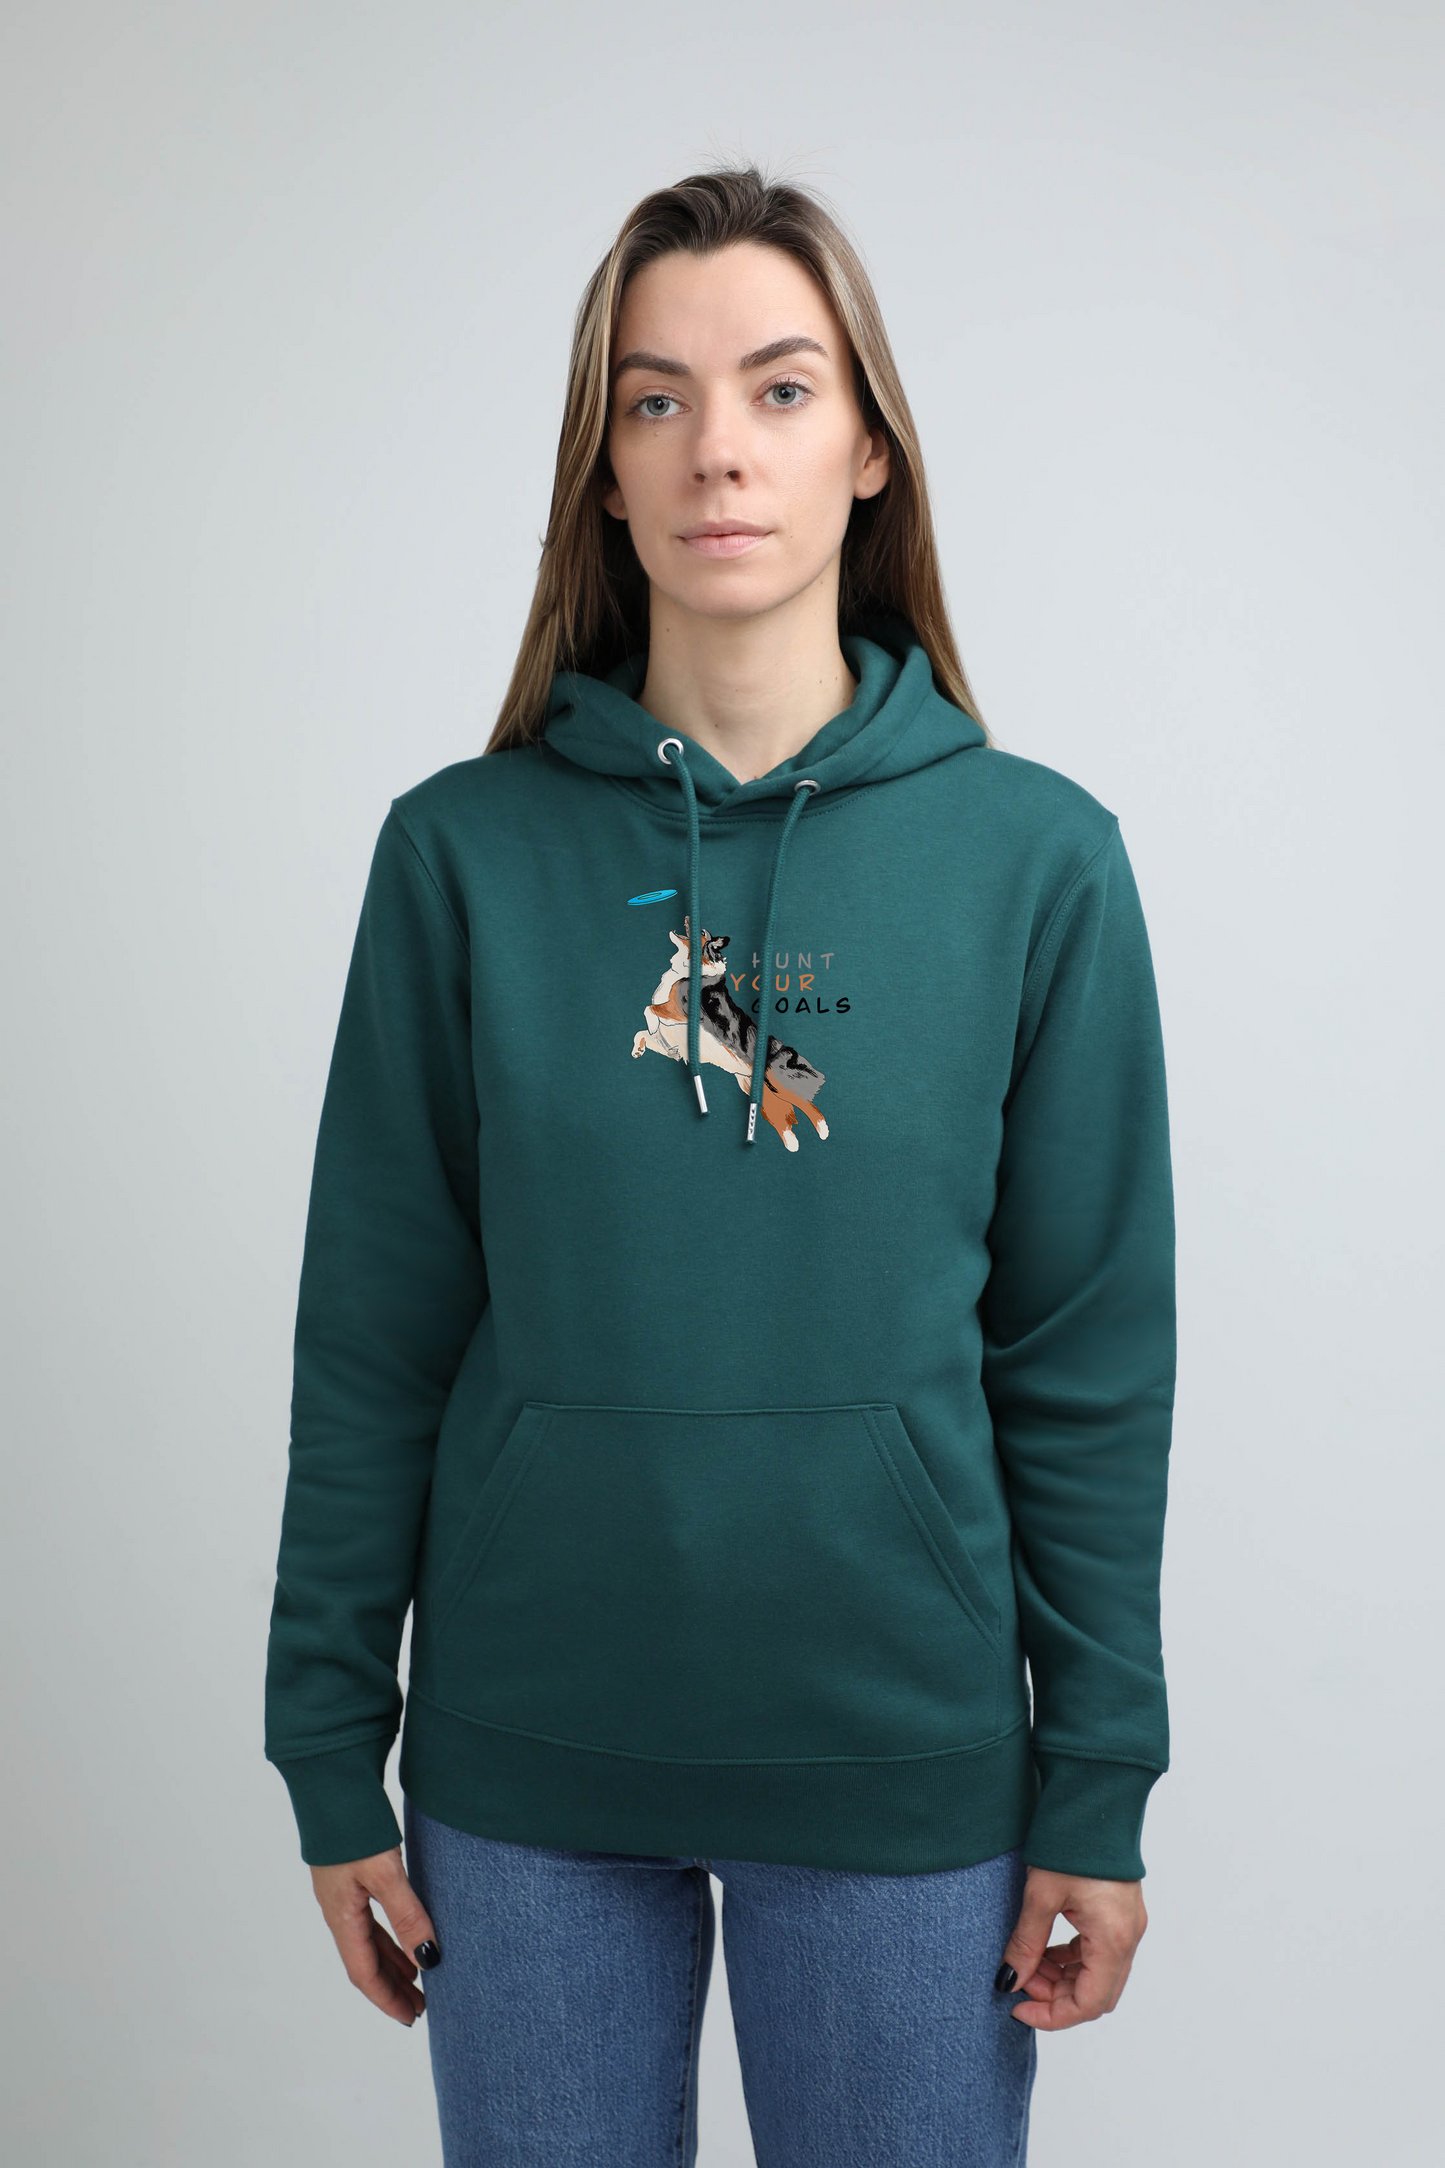 Hunt your goals | Hoodie with dog. Regular fit | Unisex by My Wild Other